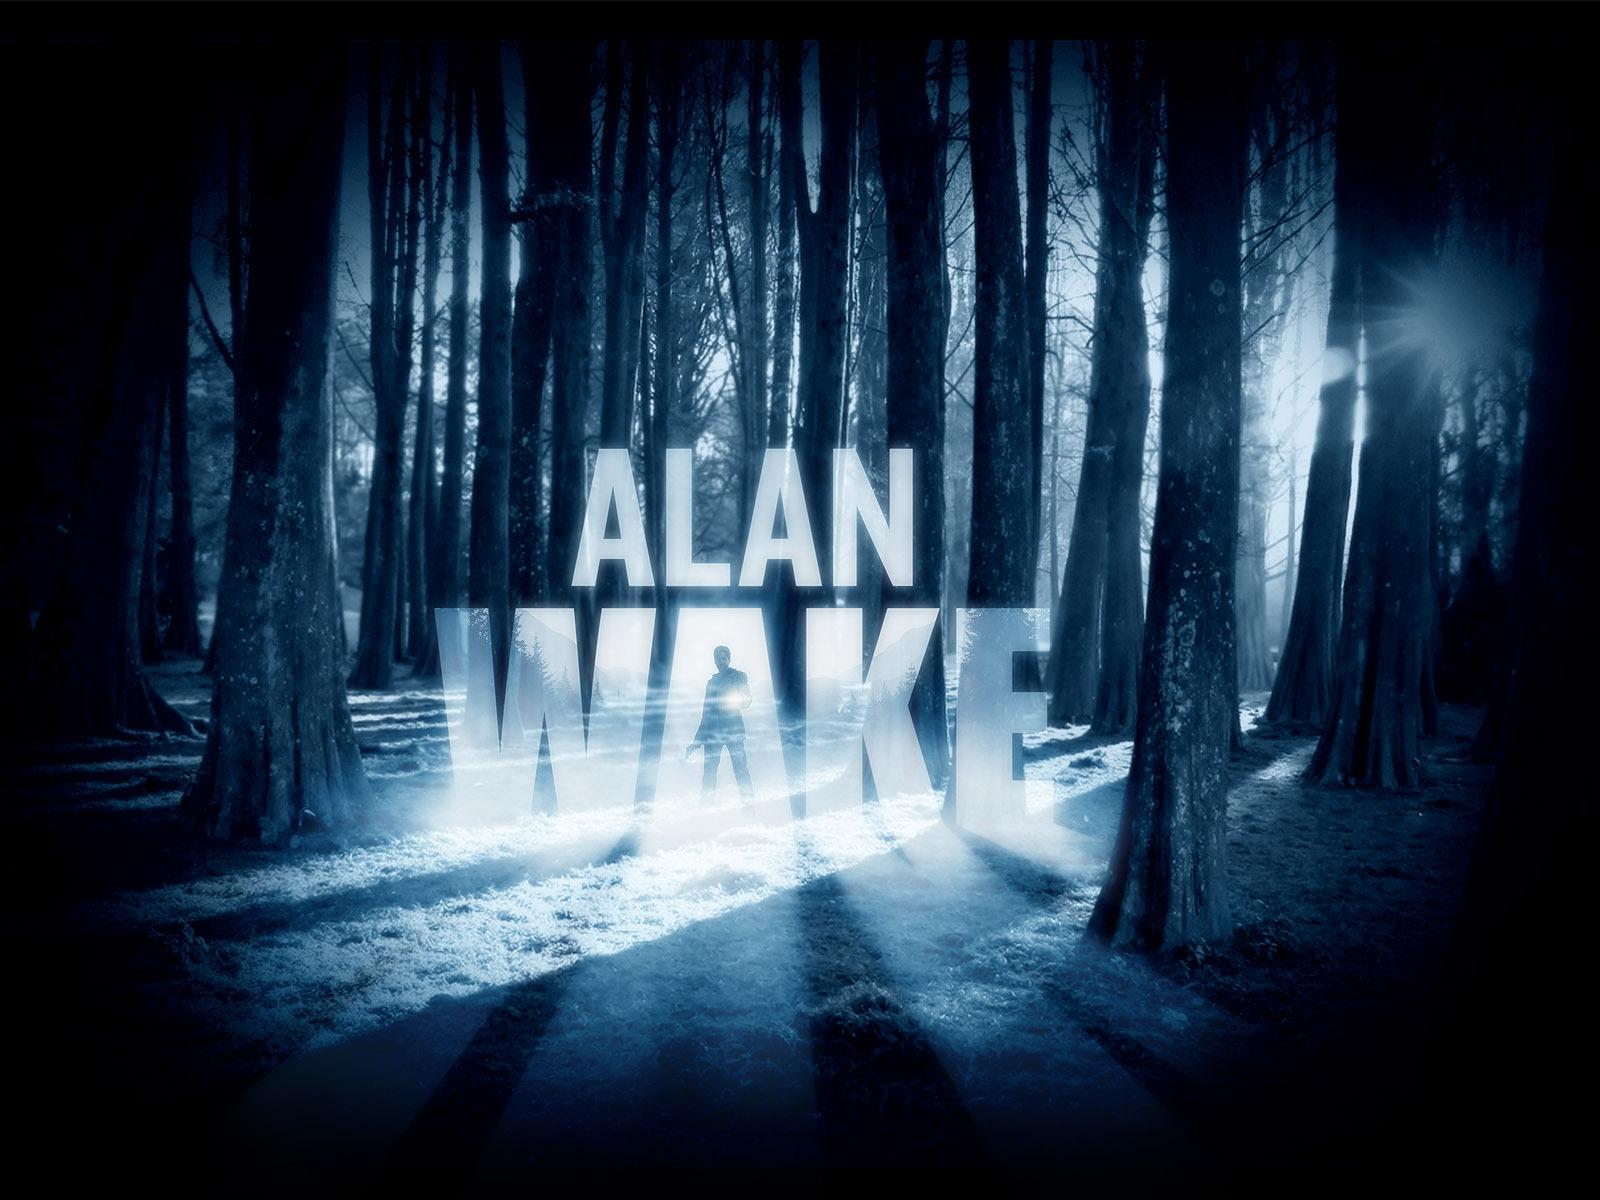 image Alan Wake Forests vdeo game lettering